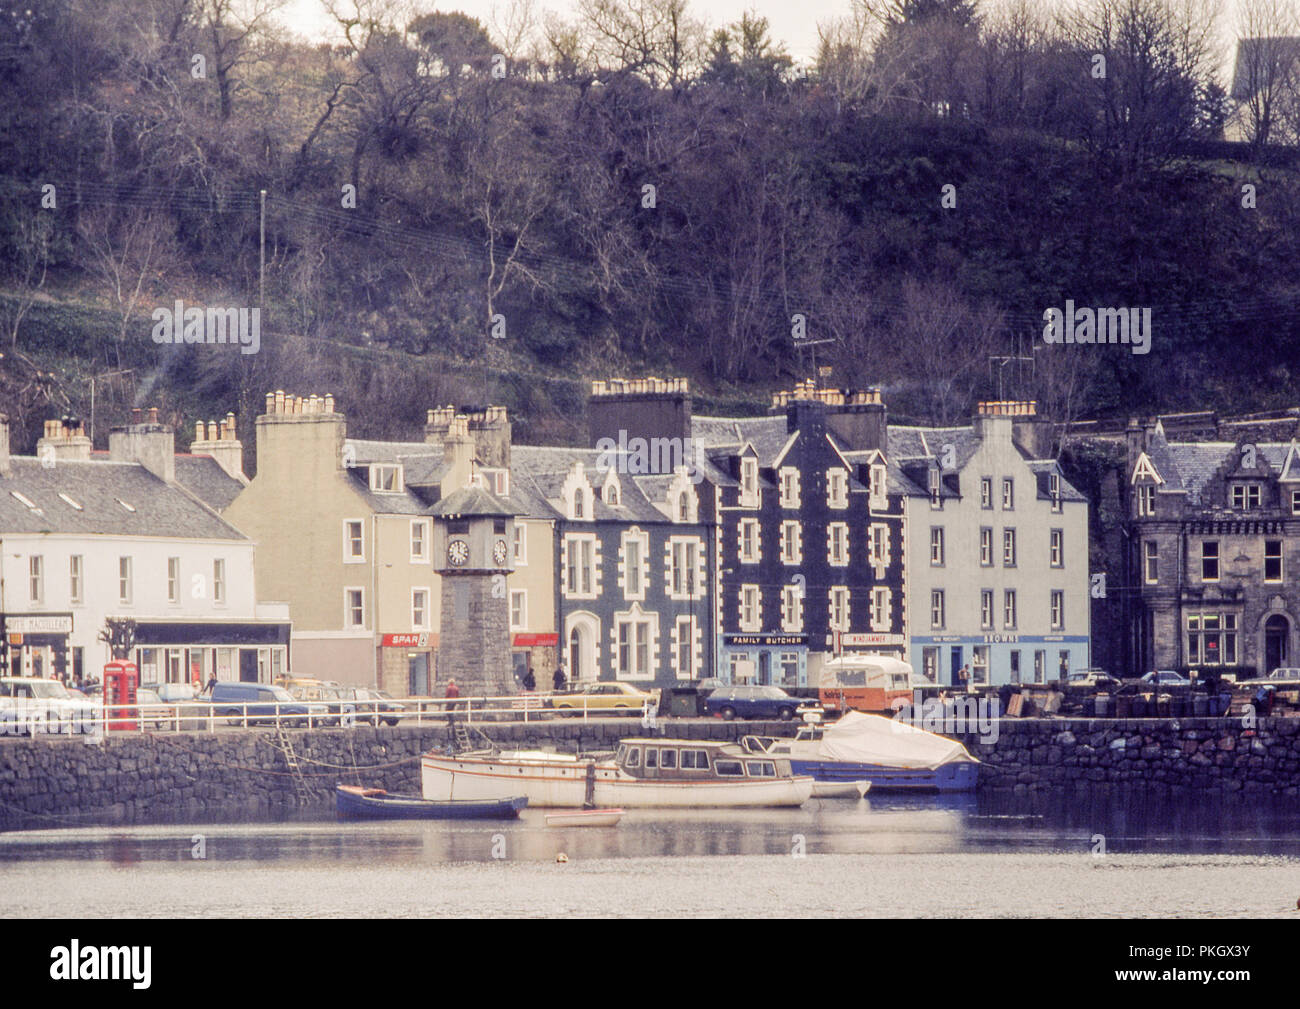 Tobermory on the shore of the Isle of Mull, Scotland. Original archive image taken in May 1980. Stock Photo